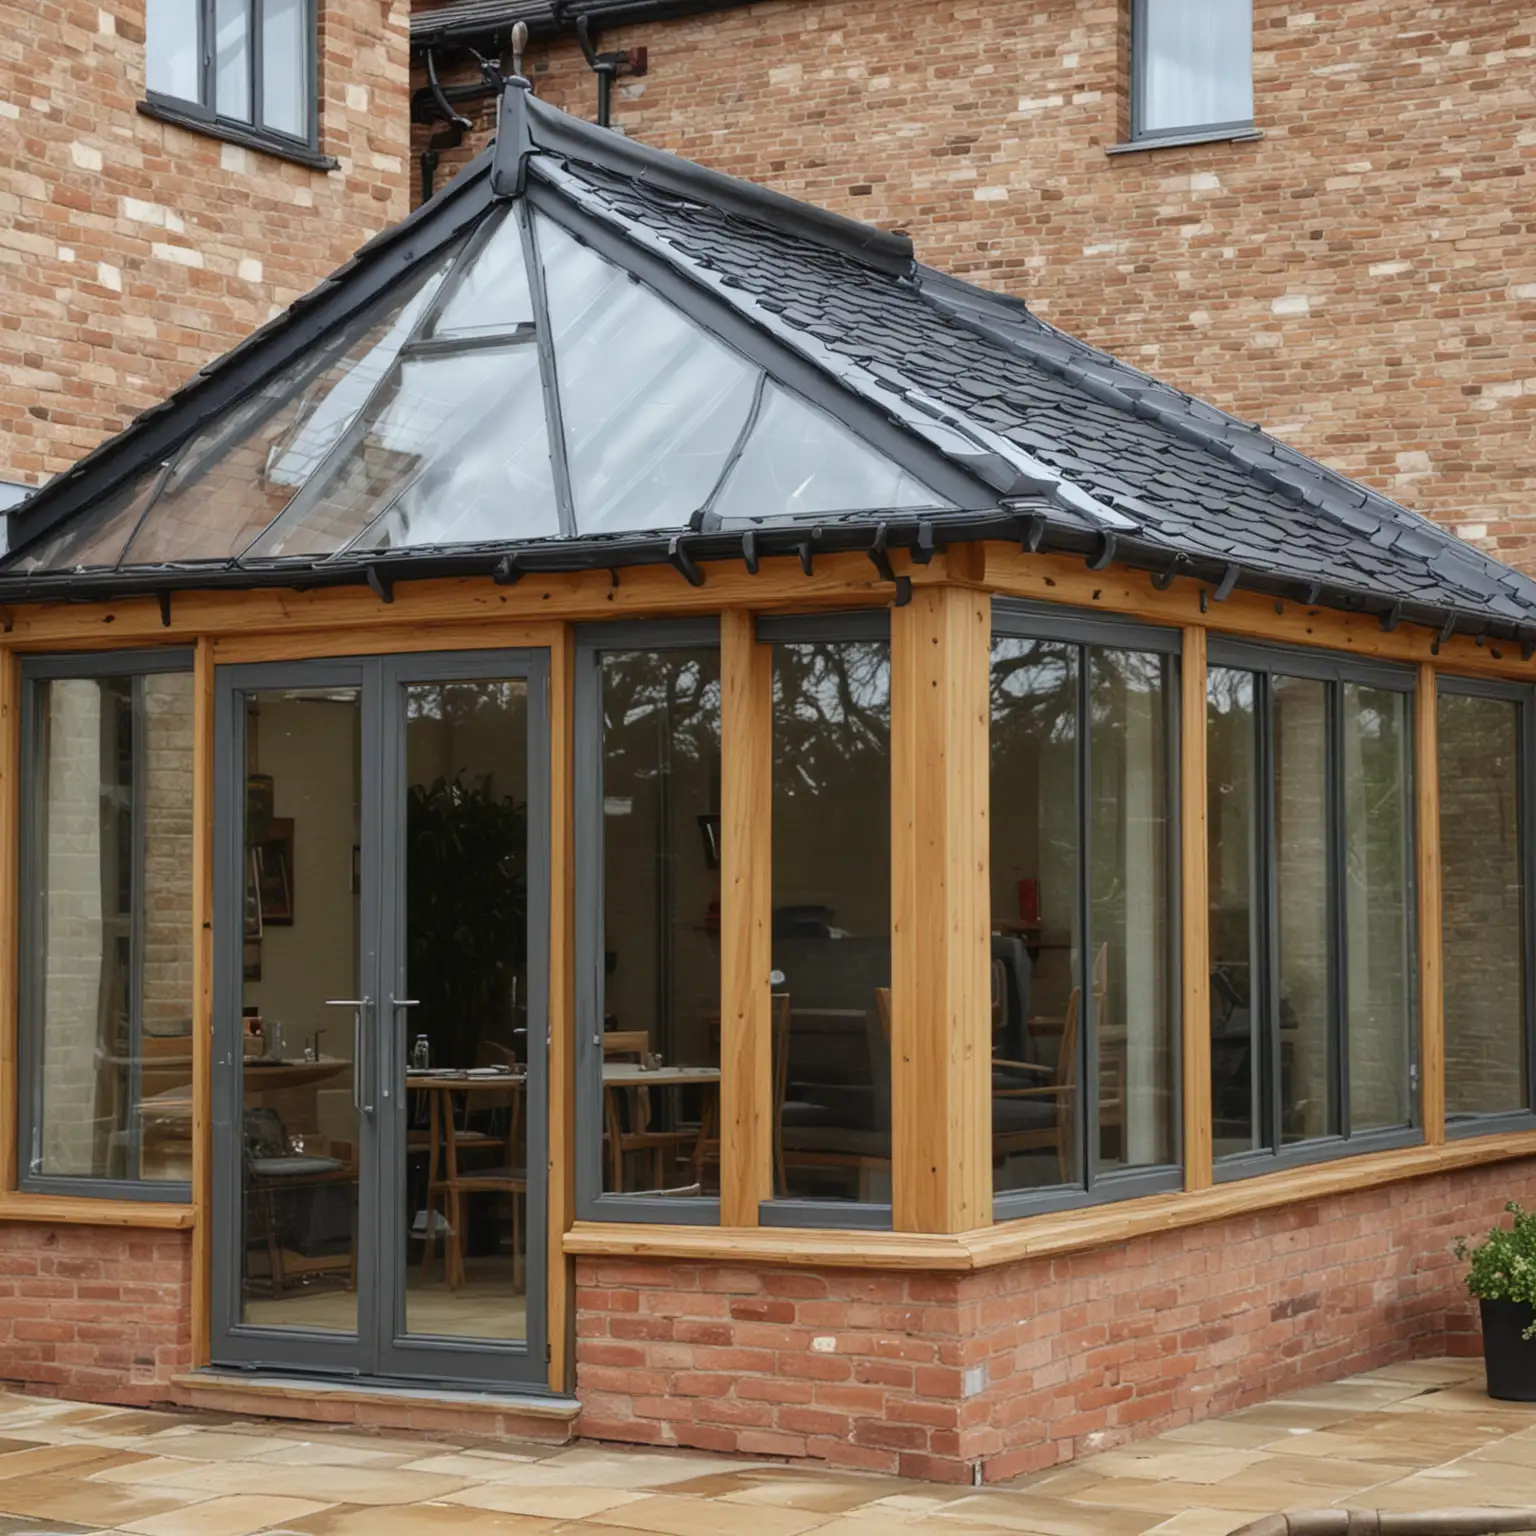  Glulam arch conservatory was natural slate roof